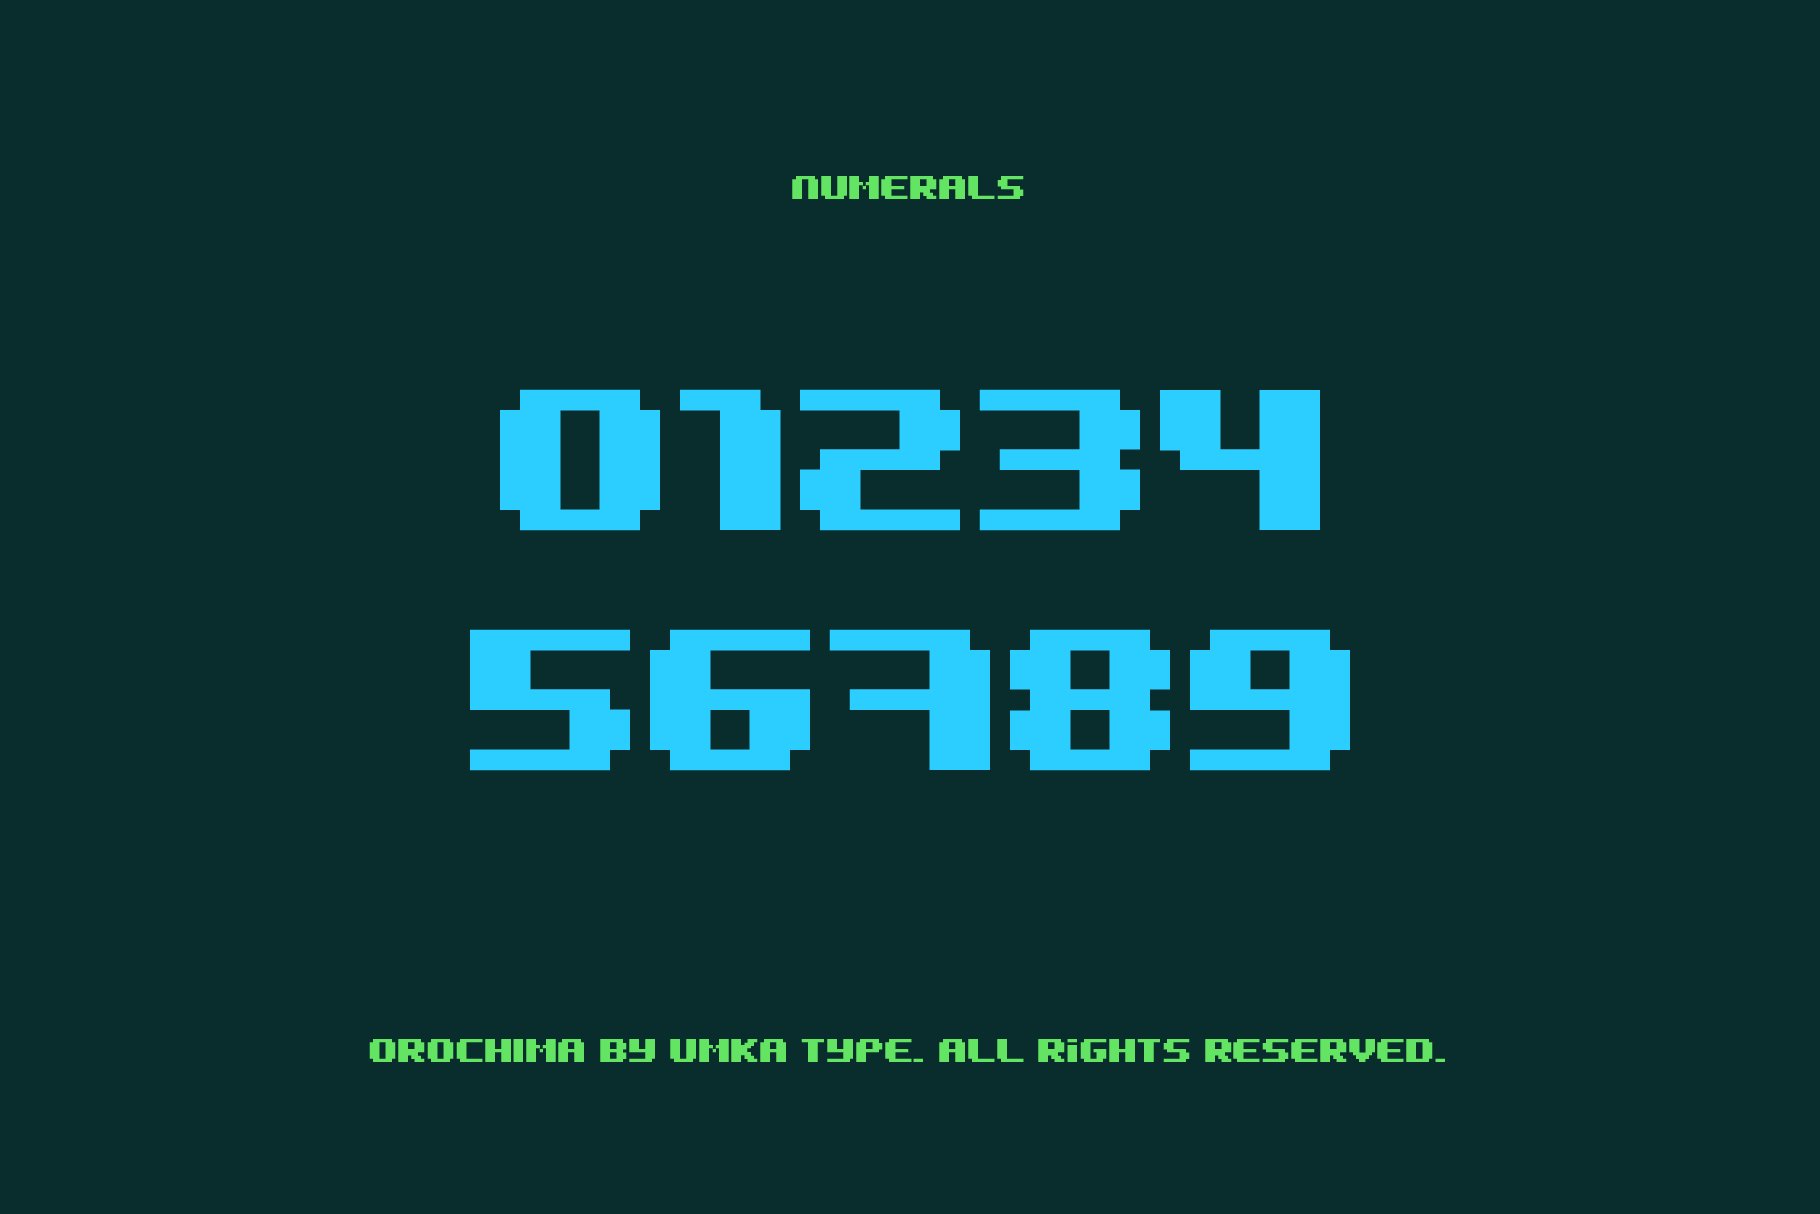 An old - school computer font with a pixel effect.